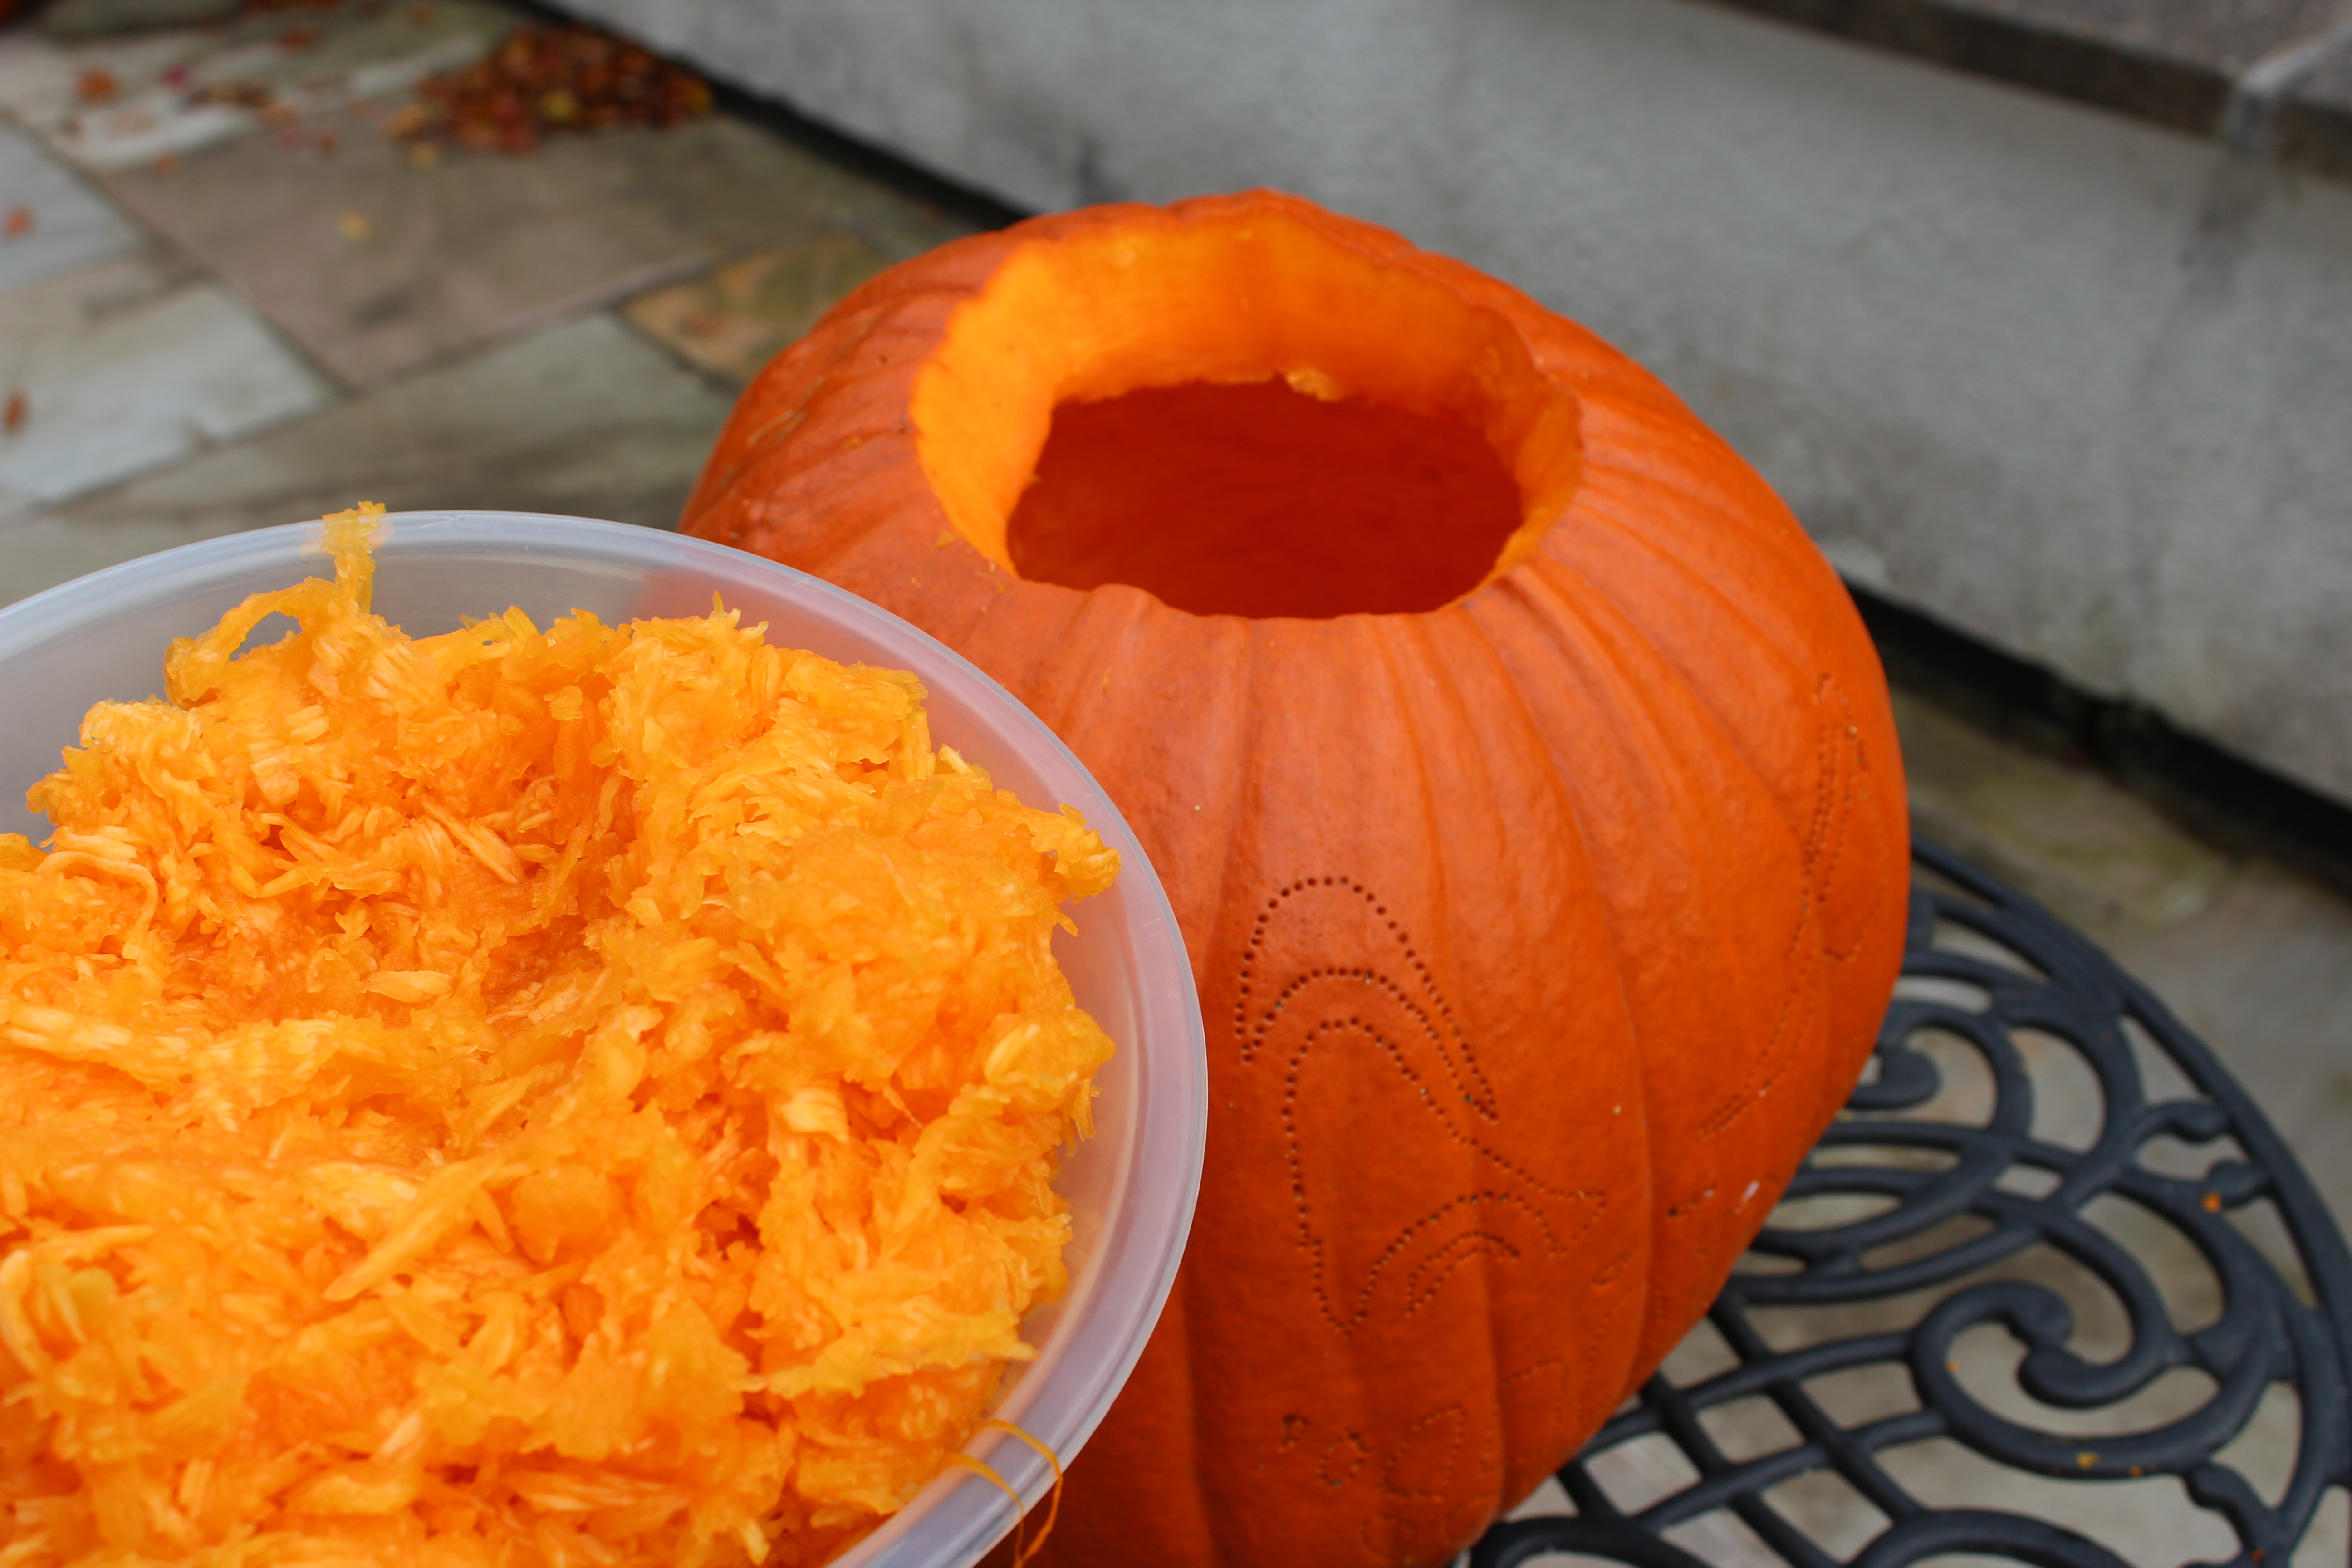 How do you carve a pumpkin? Scoop out the inside